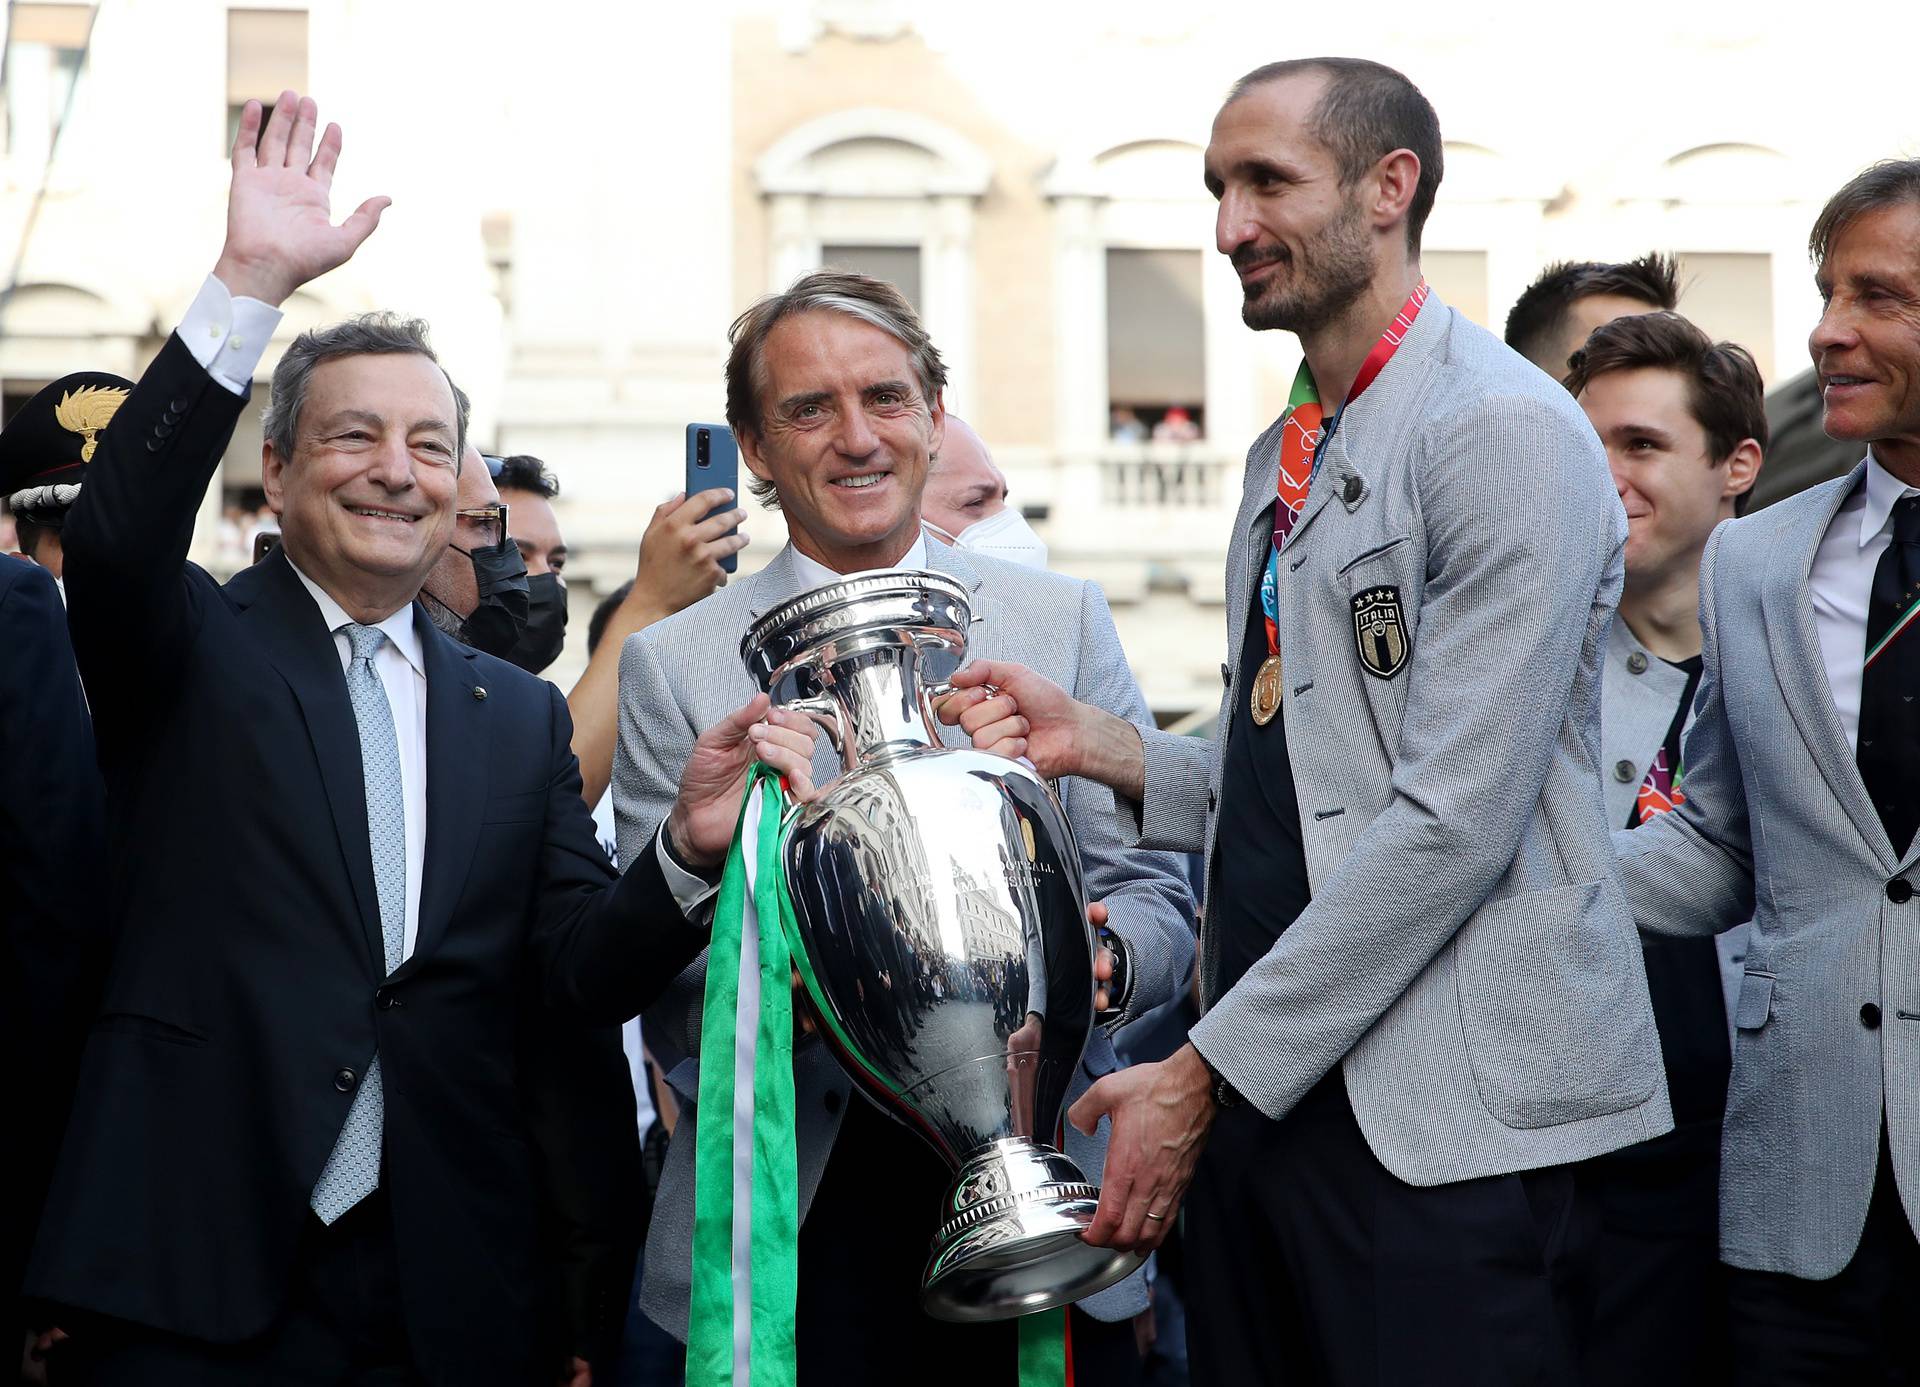 Euro 2020 - The Italy team arrive at the Chigi Palace to meet with Italy's Prime Minister Mario Draghi after they won Euro 2020